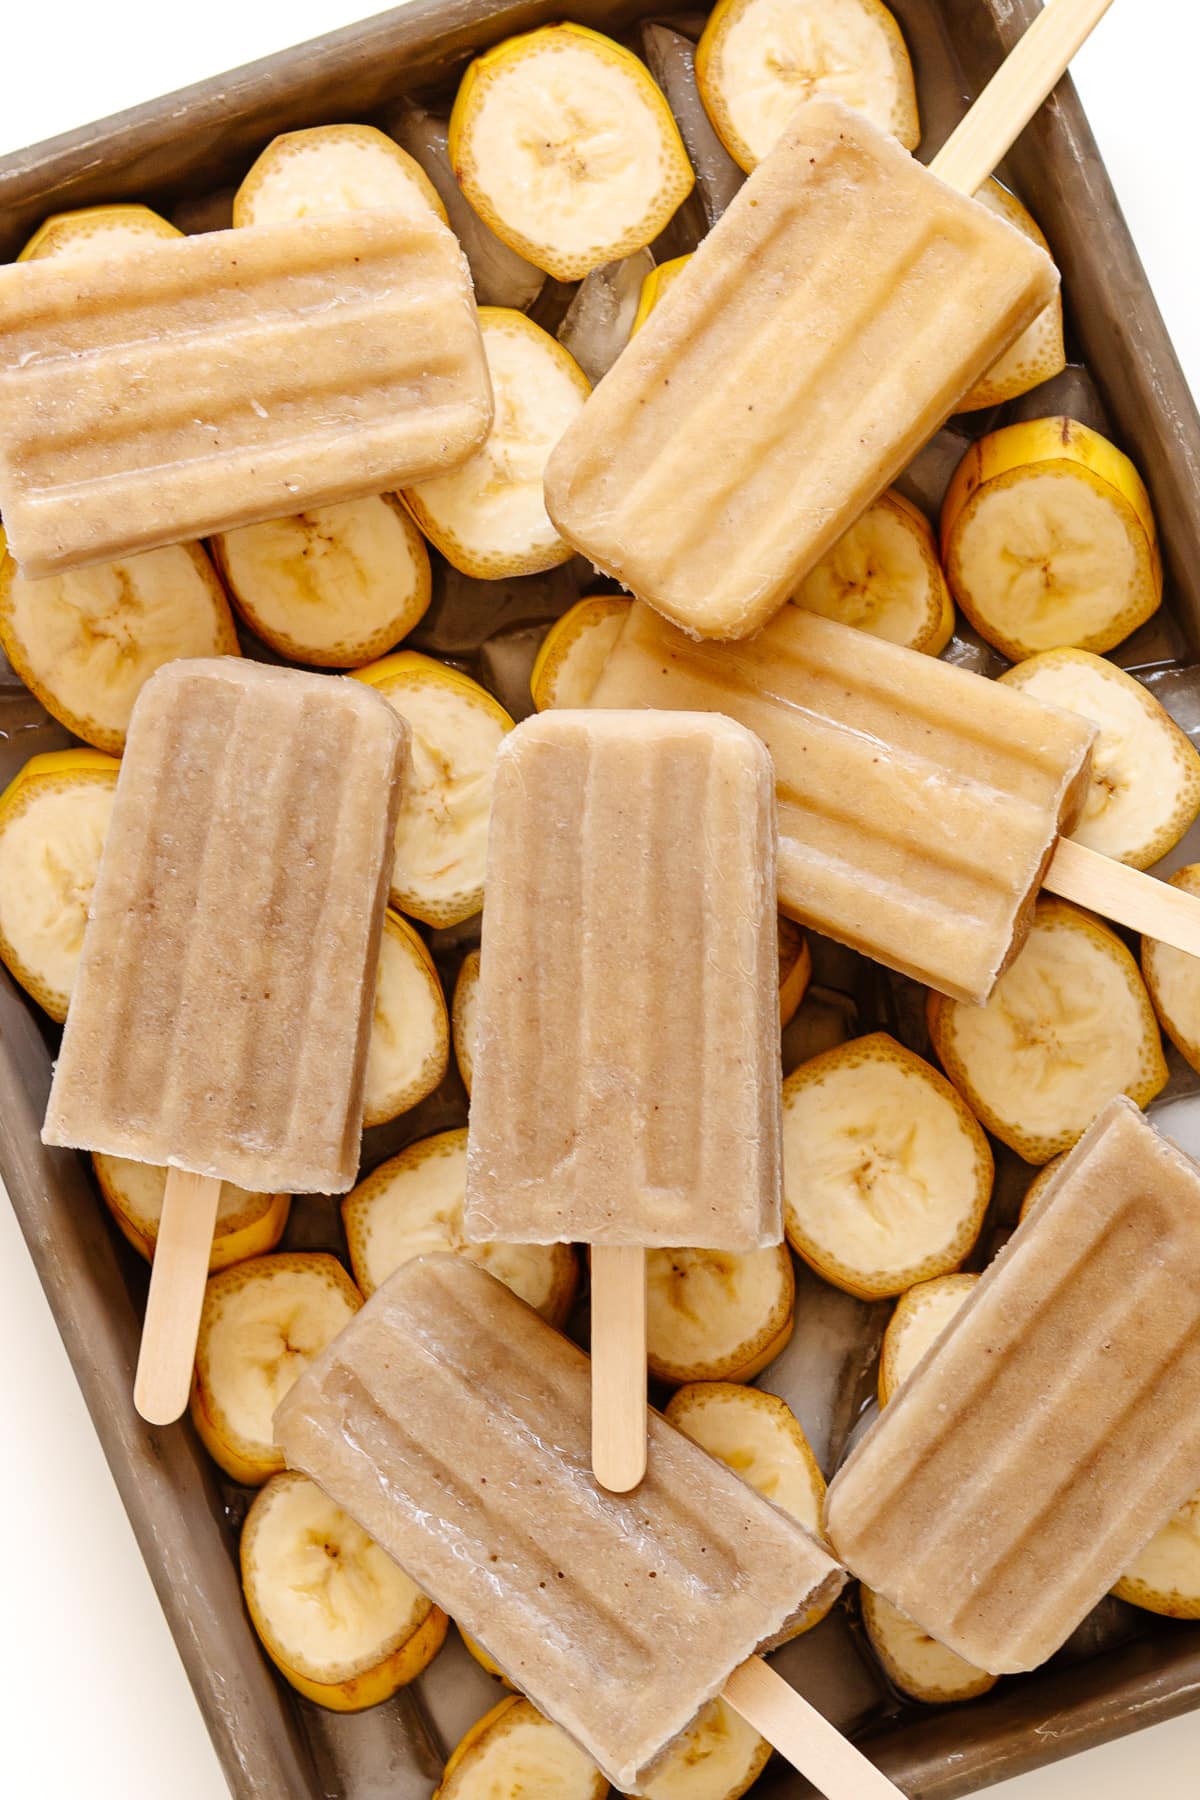 Banana popsicles sitting on a tray of banana slices.